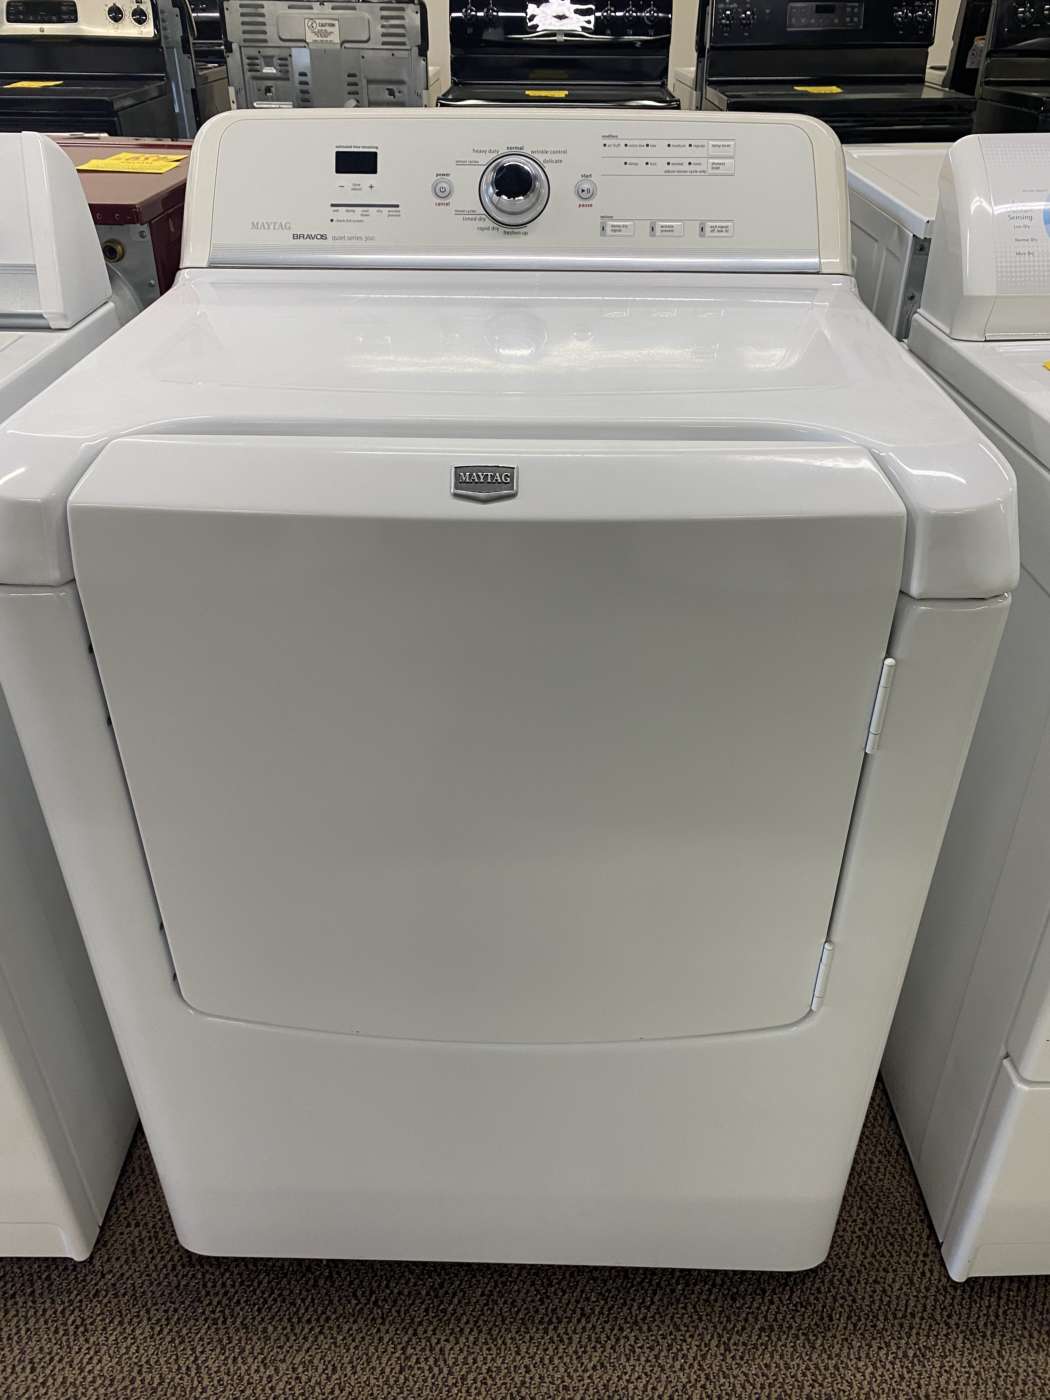 Reconditioned MAYTAG 7.3 Cu. Ft. Electric Dryer – White